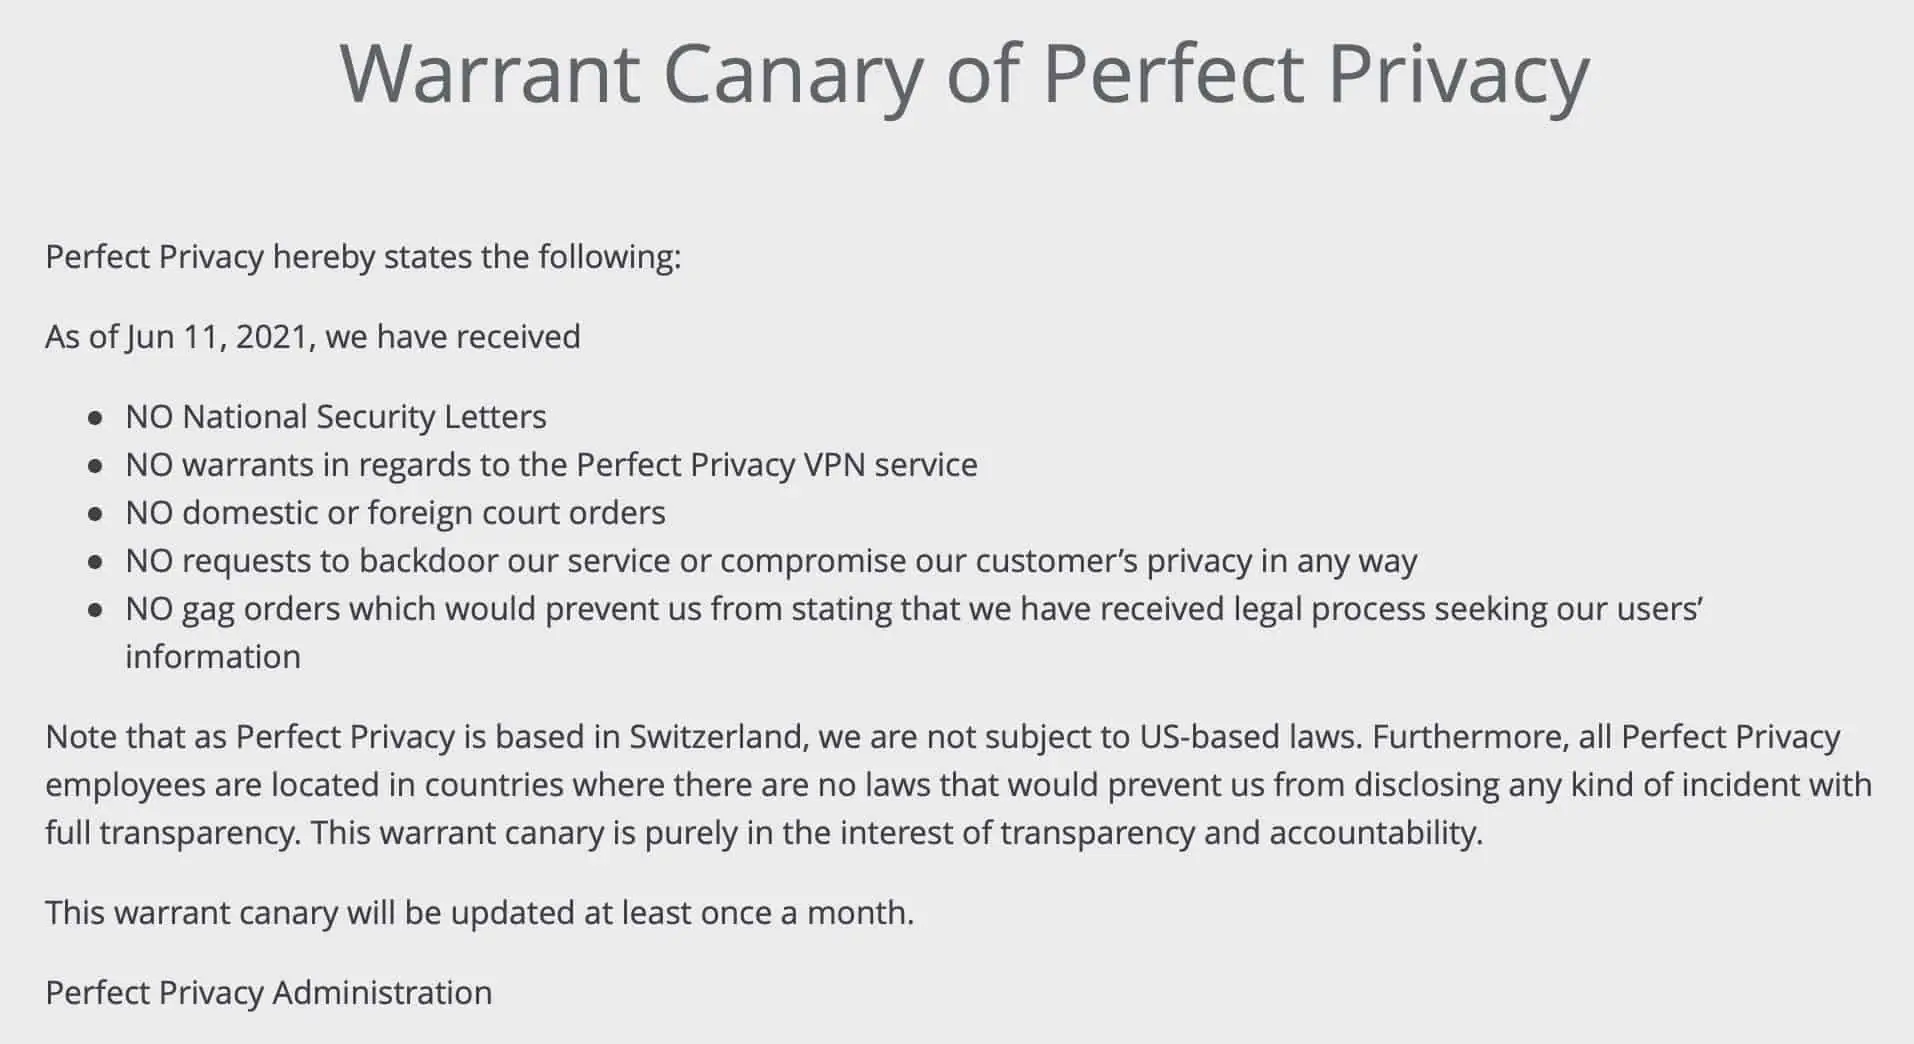 PerfectPrivacy - Warrant Canary